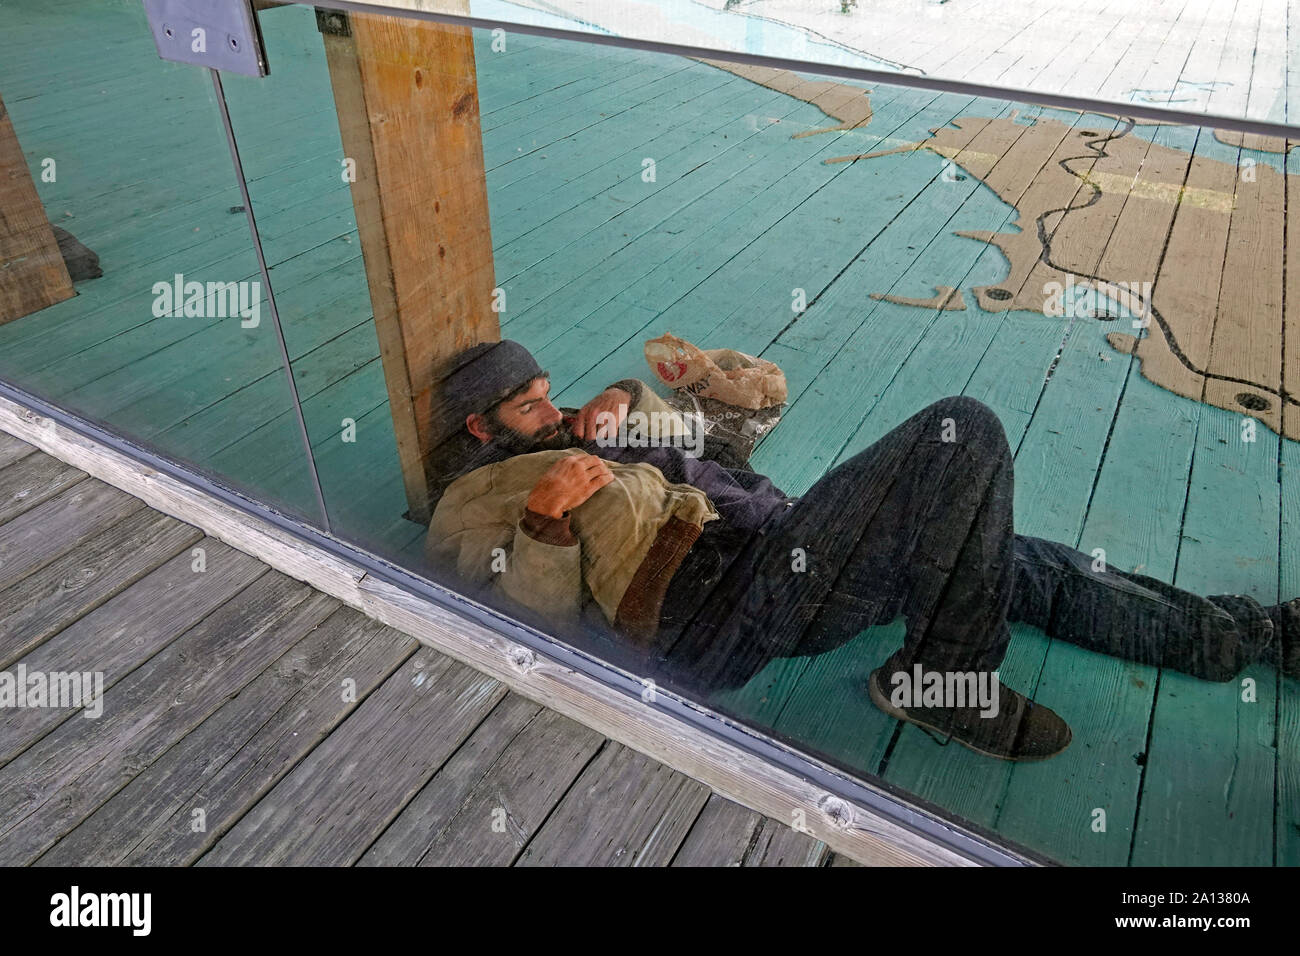 A homeless man sleeps behind a glass window at a public walkway in Coos Bay, Oregon, Along the Oregon Pacific Coast. Stock Photo